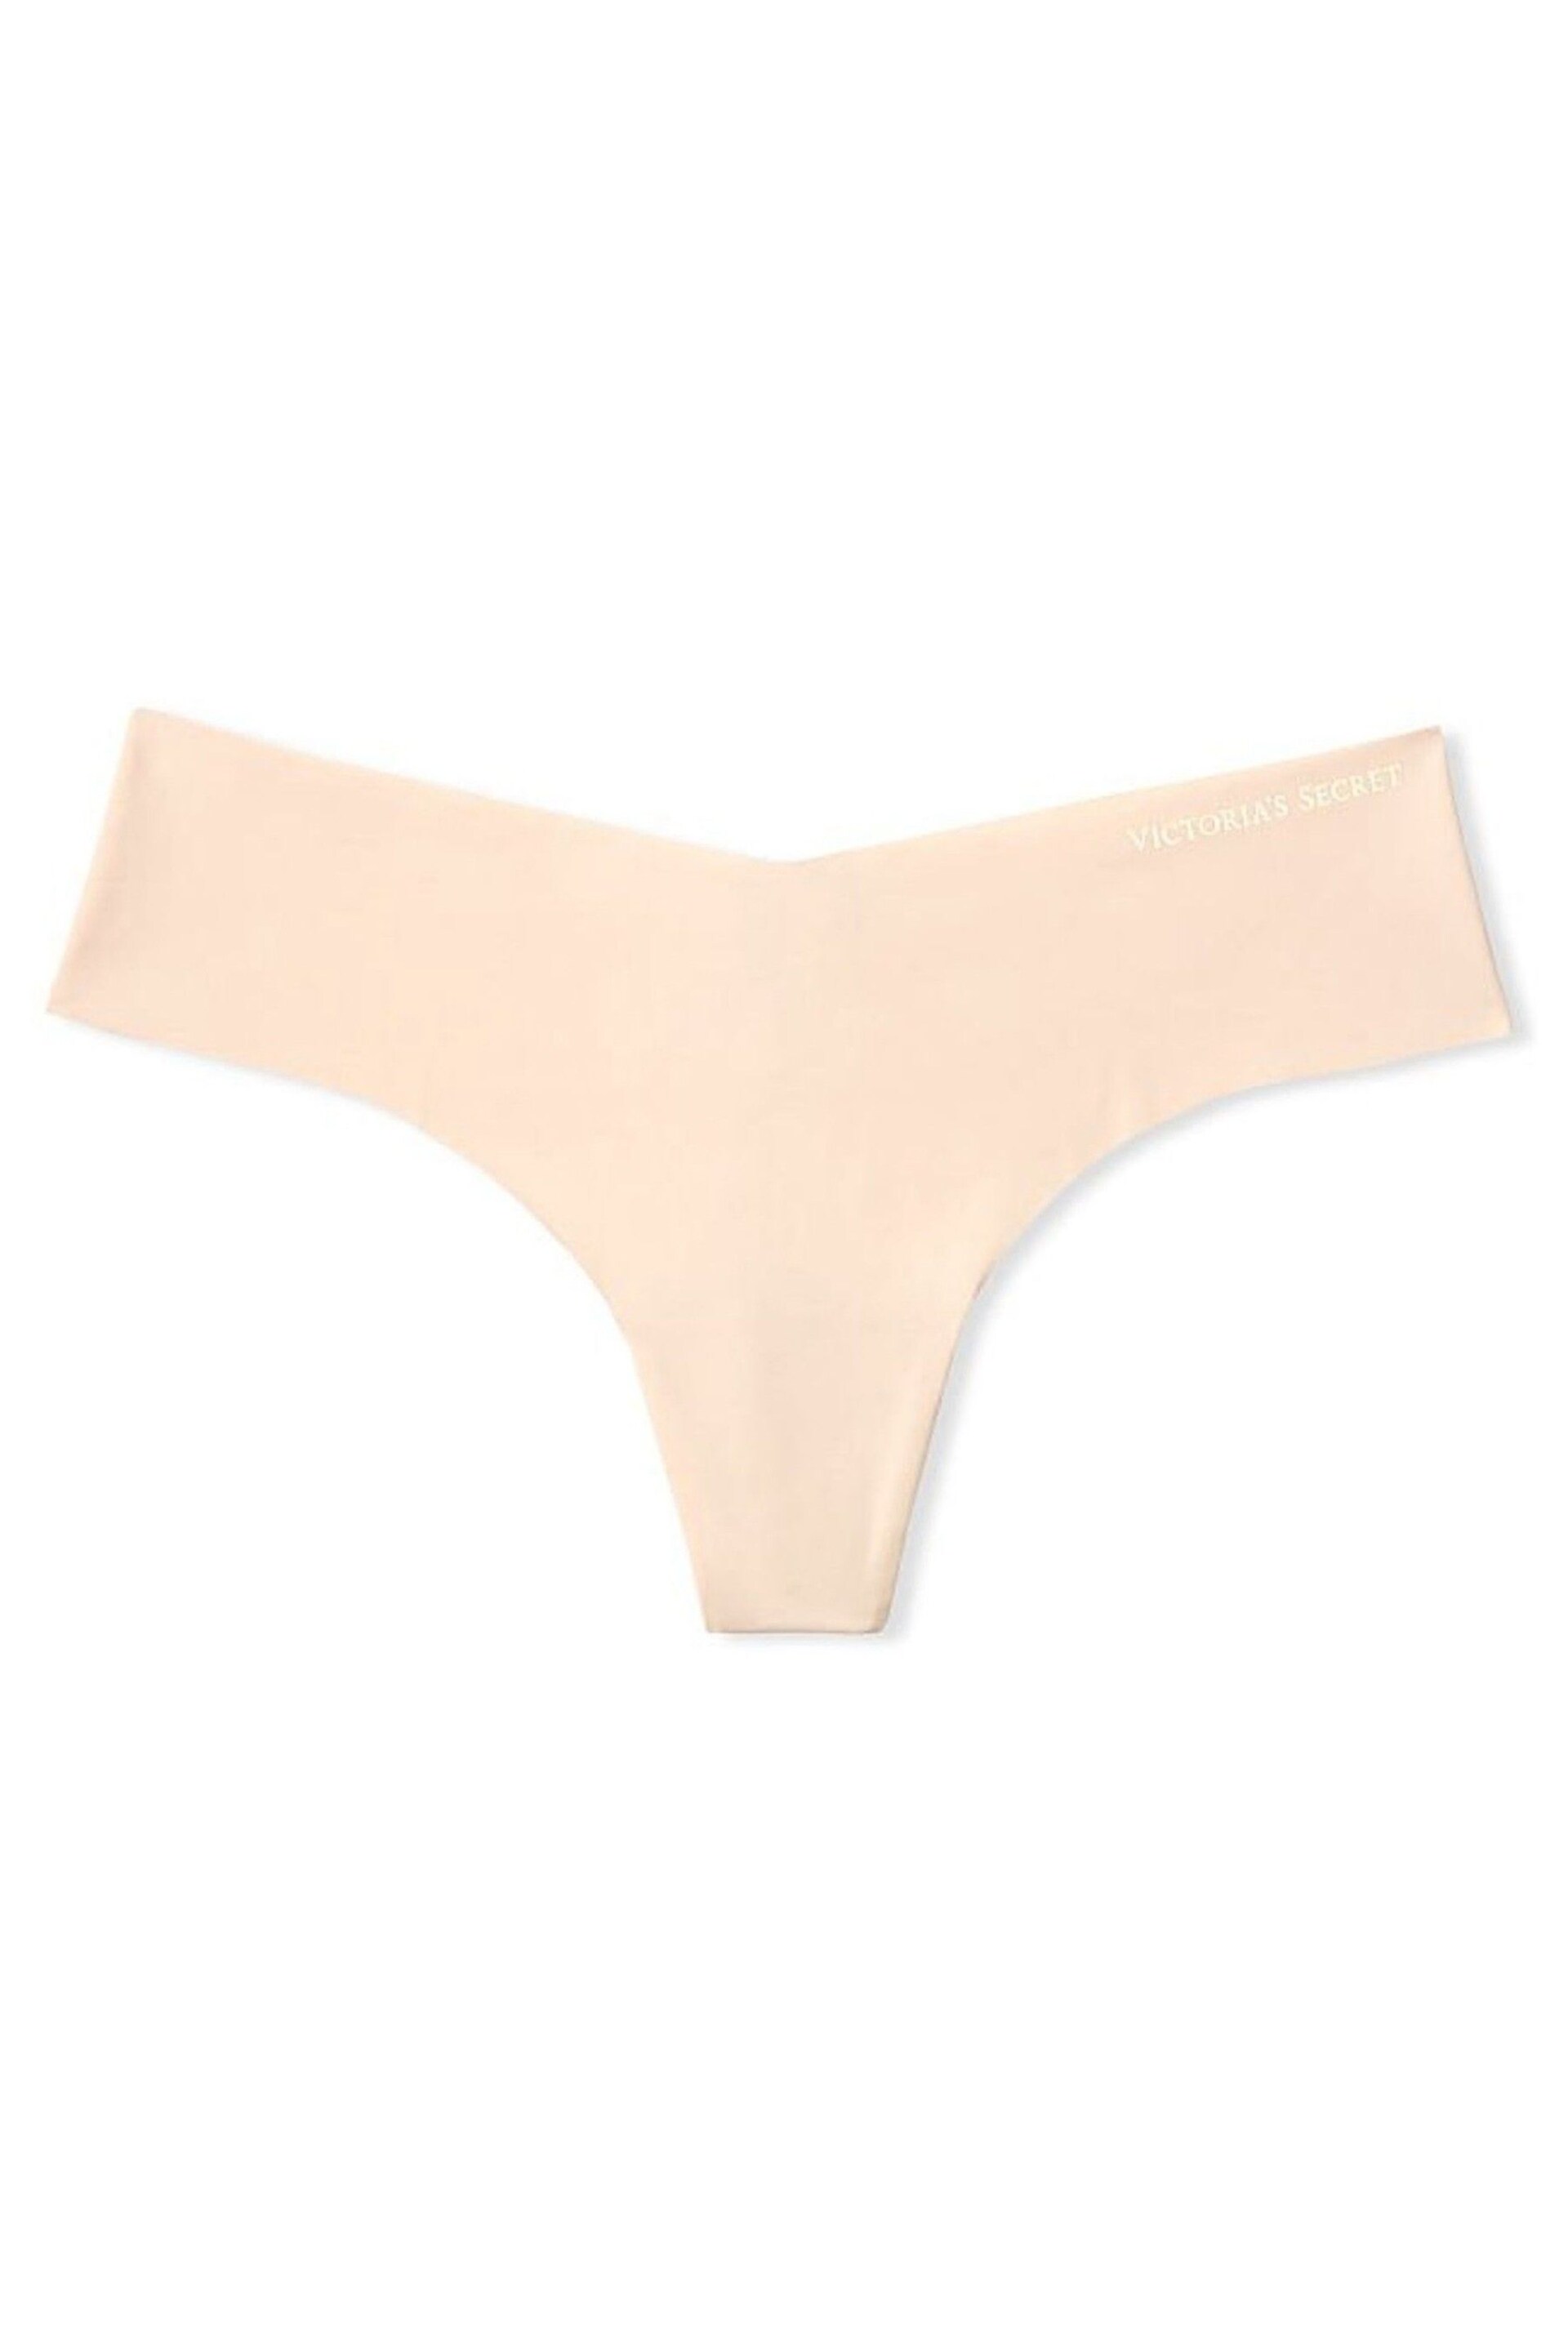 Victoria's Secret Champagne Nude Thong No-Show Knickers - Image 3 of 3